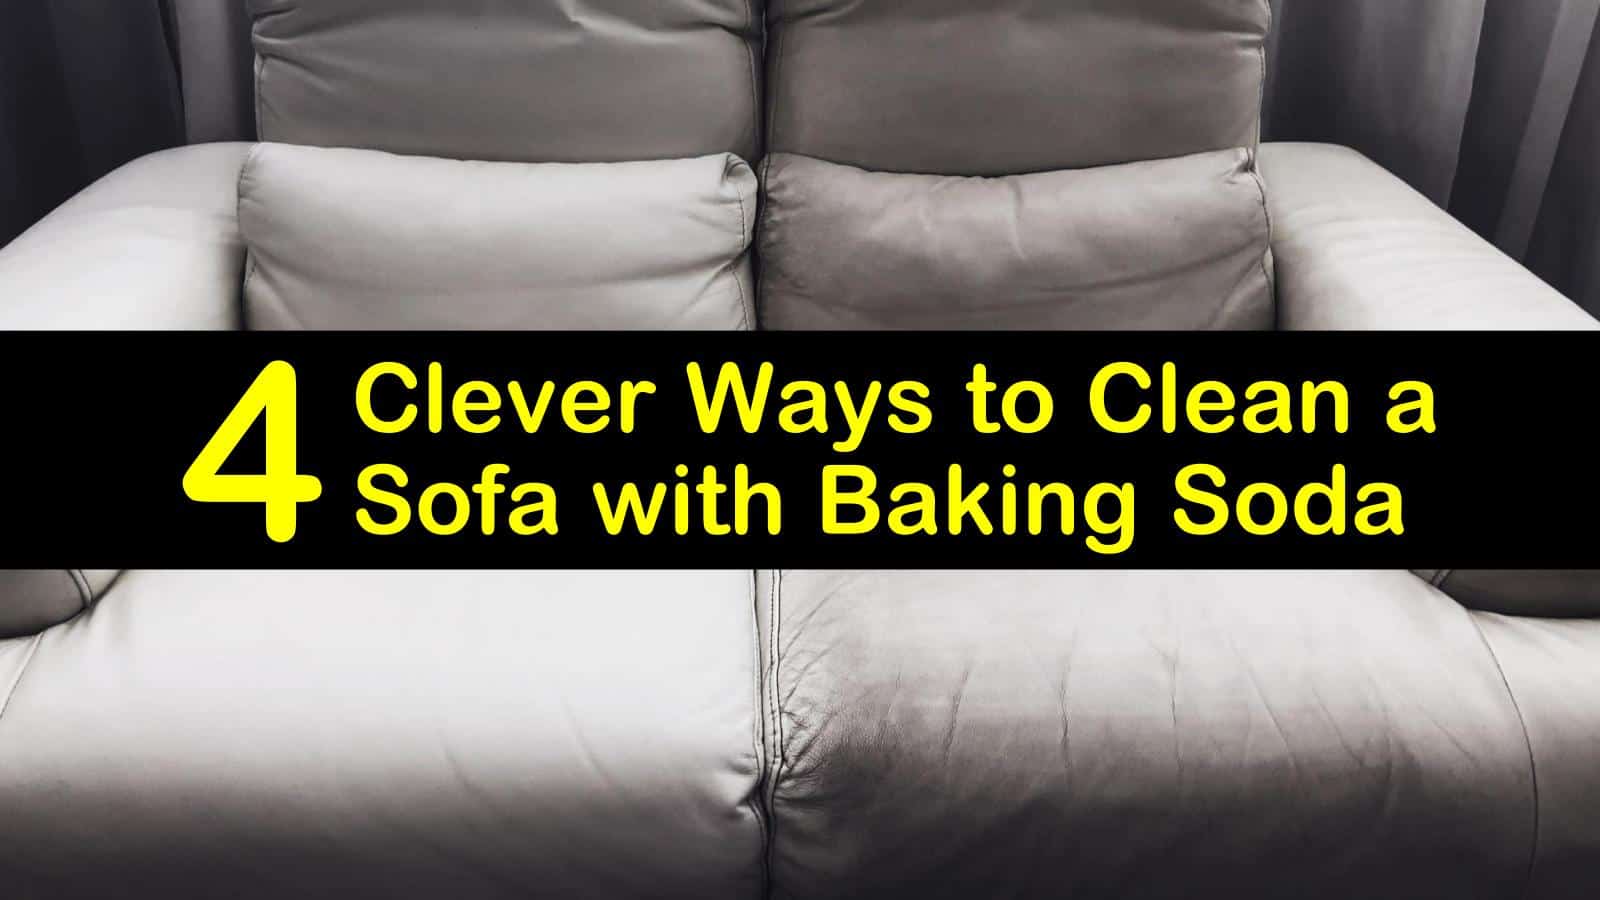 Clean A Sofa With Baking Soda, Can I Use Bicarbonate Of Soda To Clean My Sofa